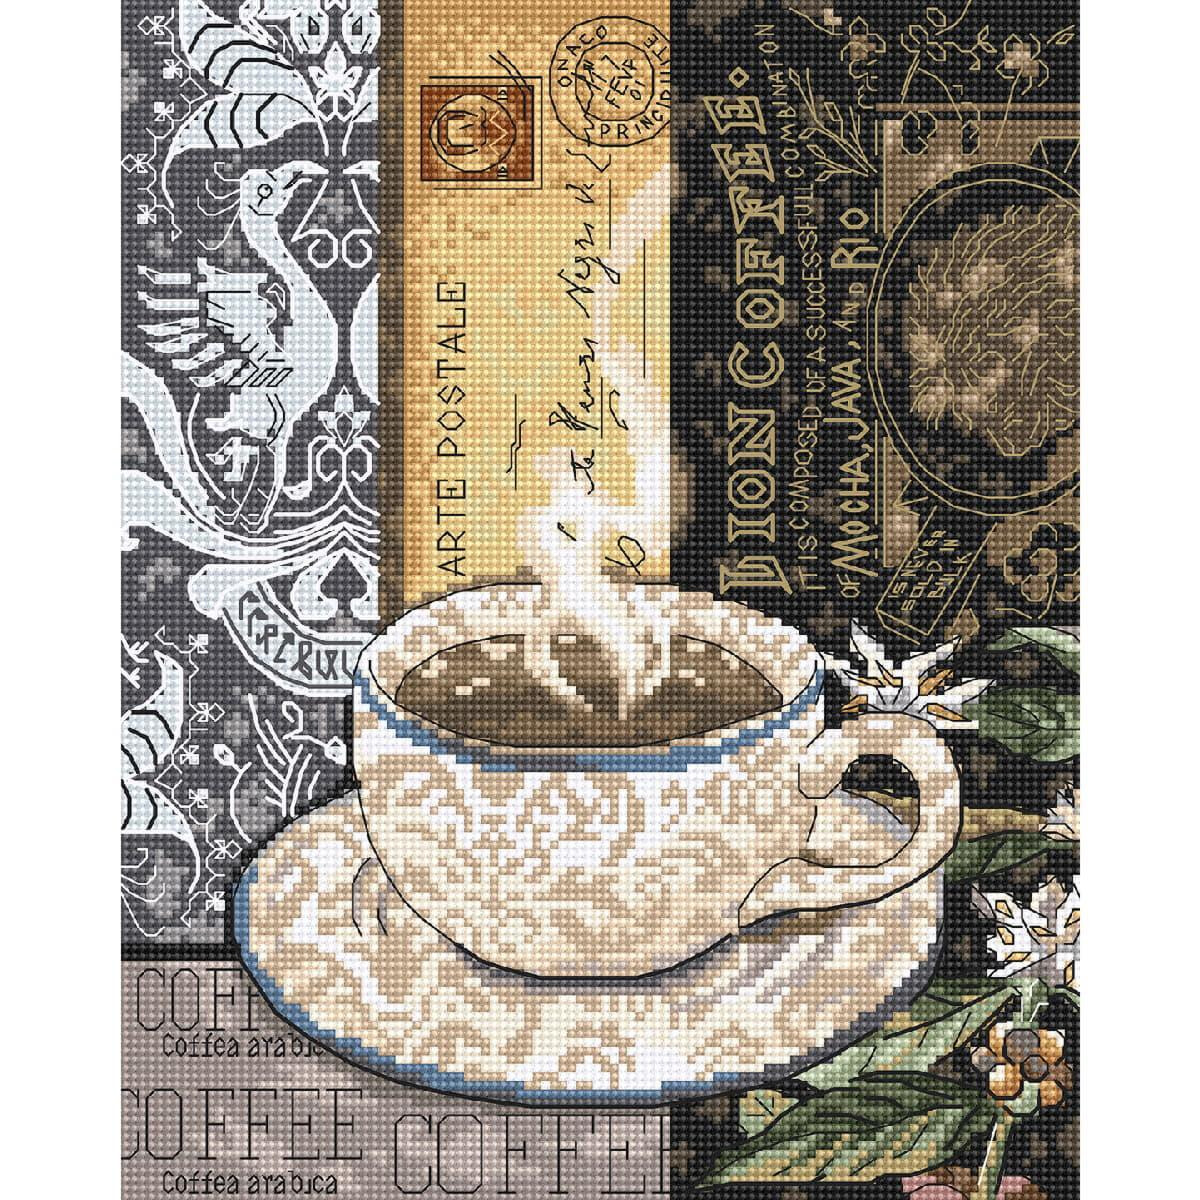 Letistitch counted cross stitch kit "Lion Coffee...